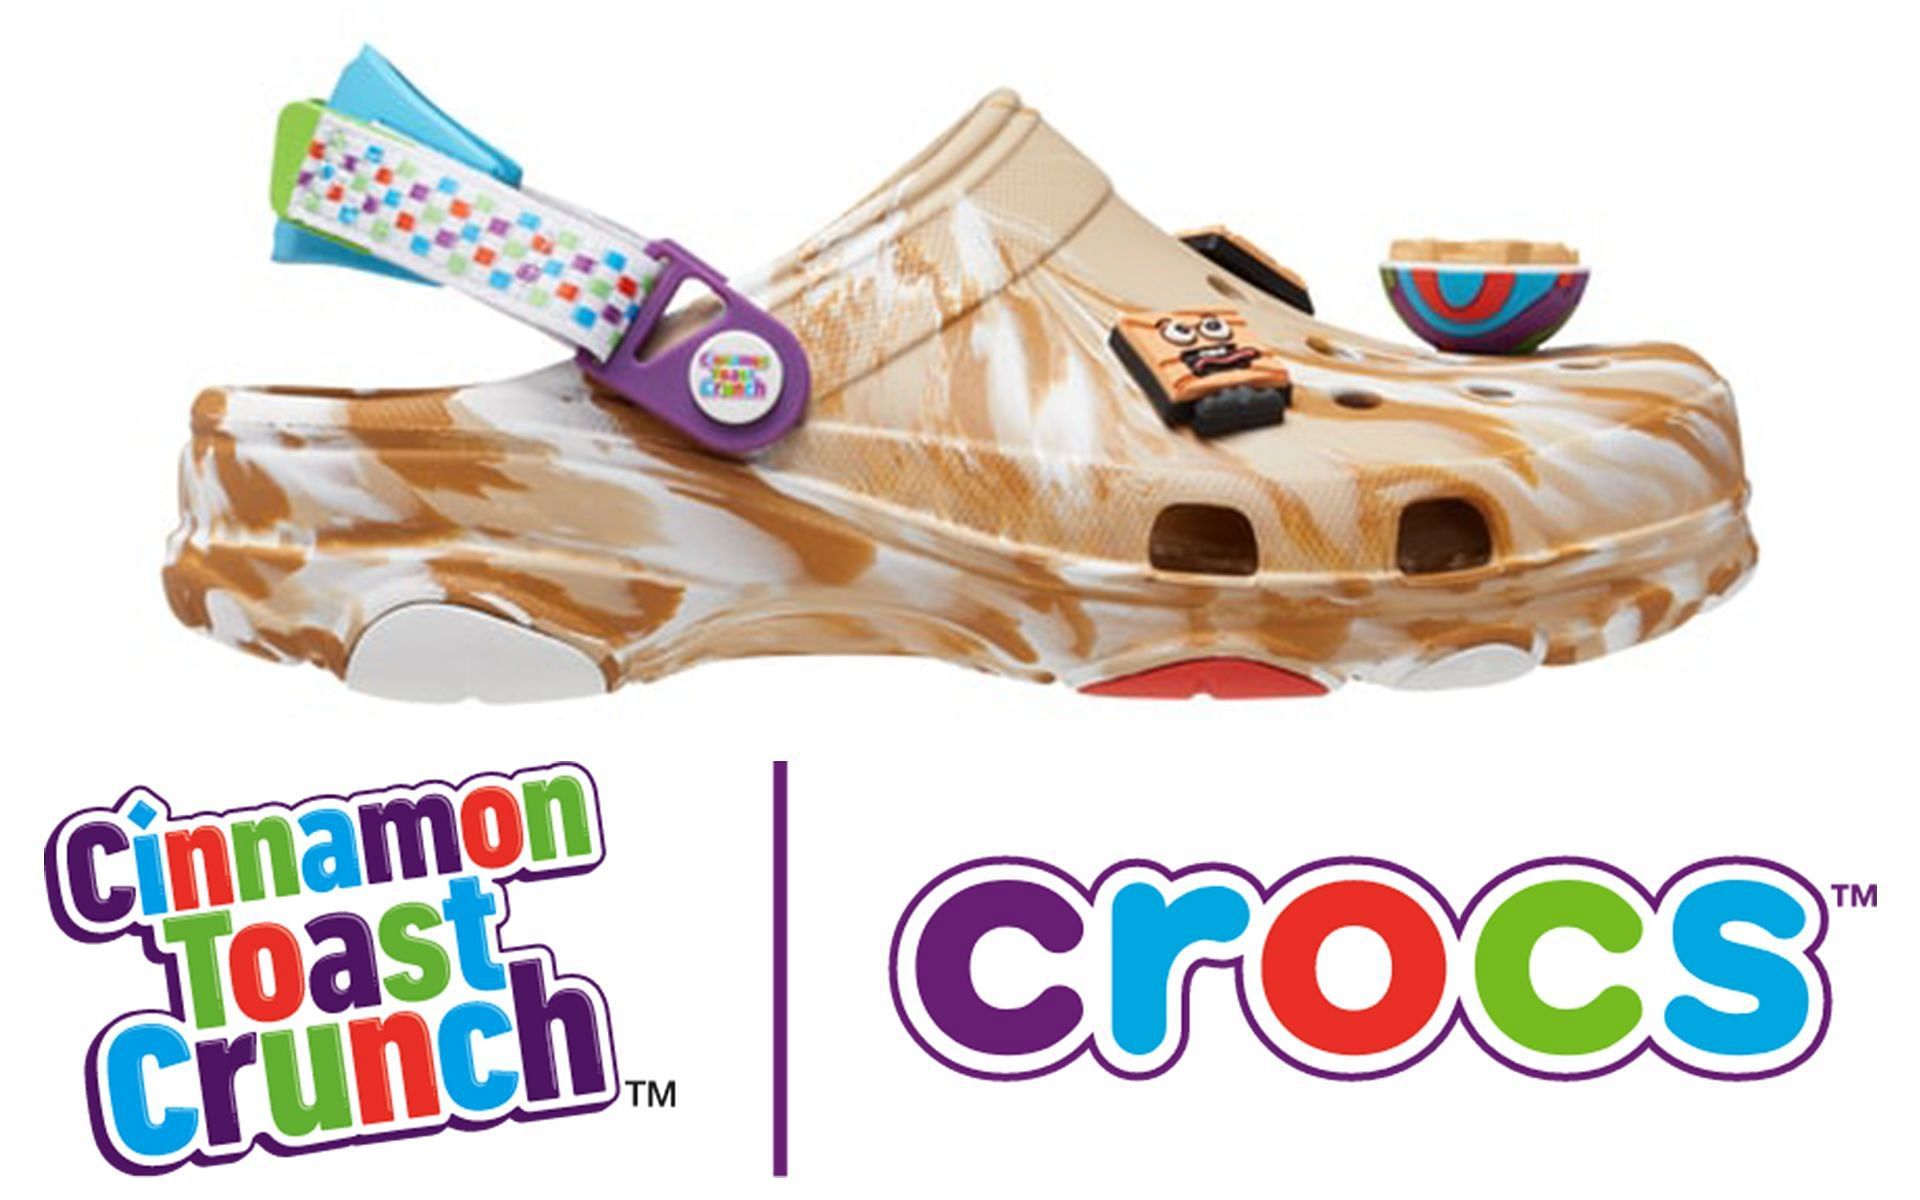 Crocs Unveils Lucky Charms Edition Red Clogs and Jibbitz - LastCall.news